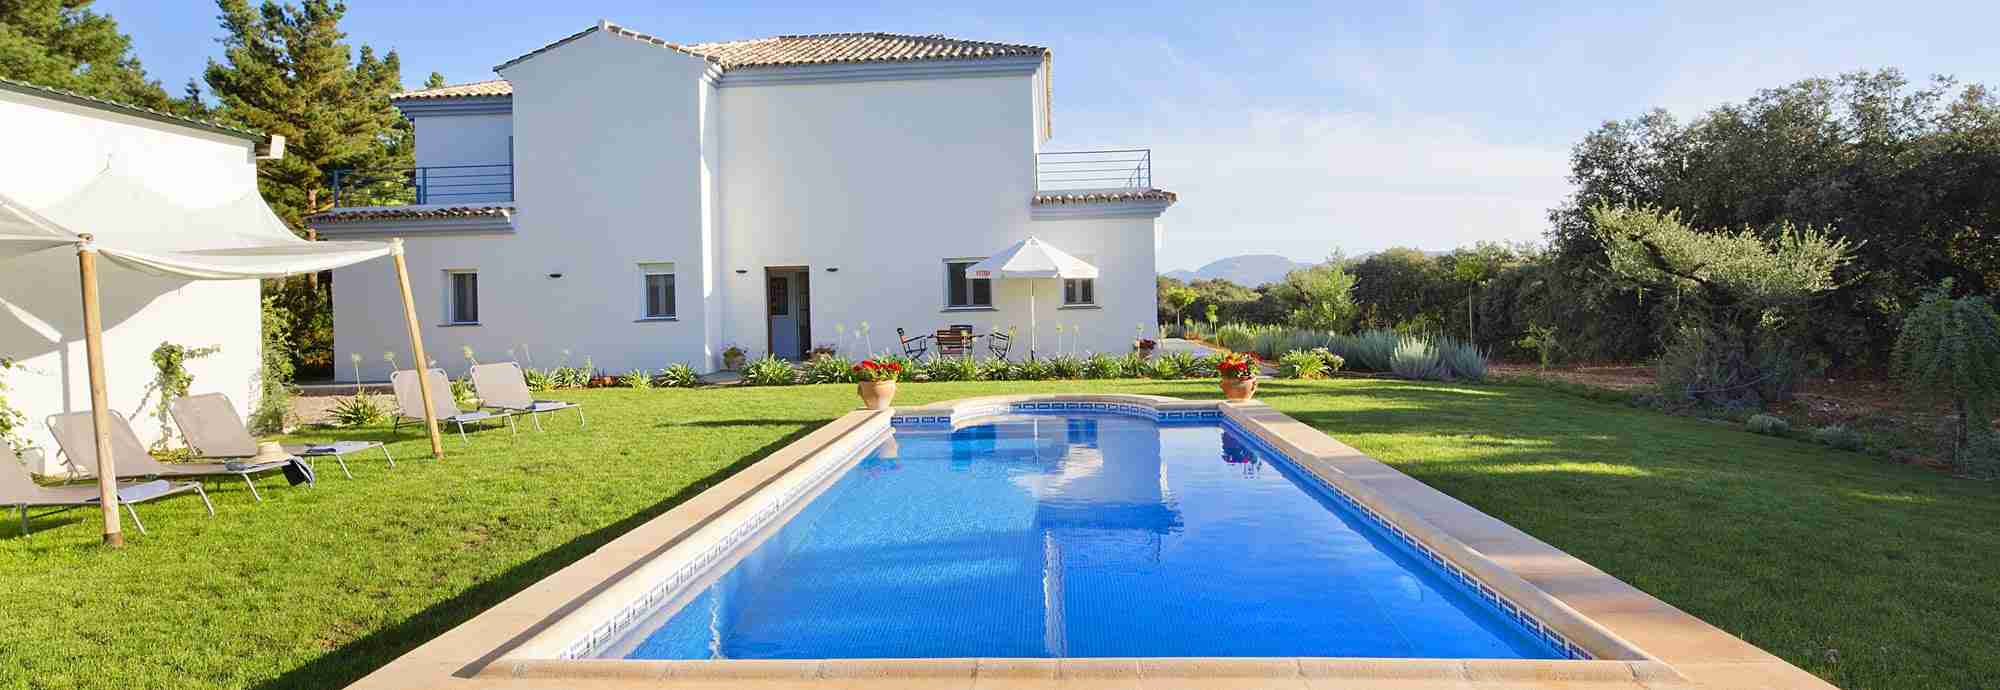 Gleaming Ronda villa with large private pool and green lawned gardens